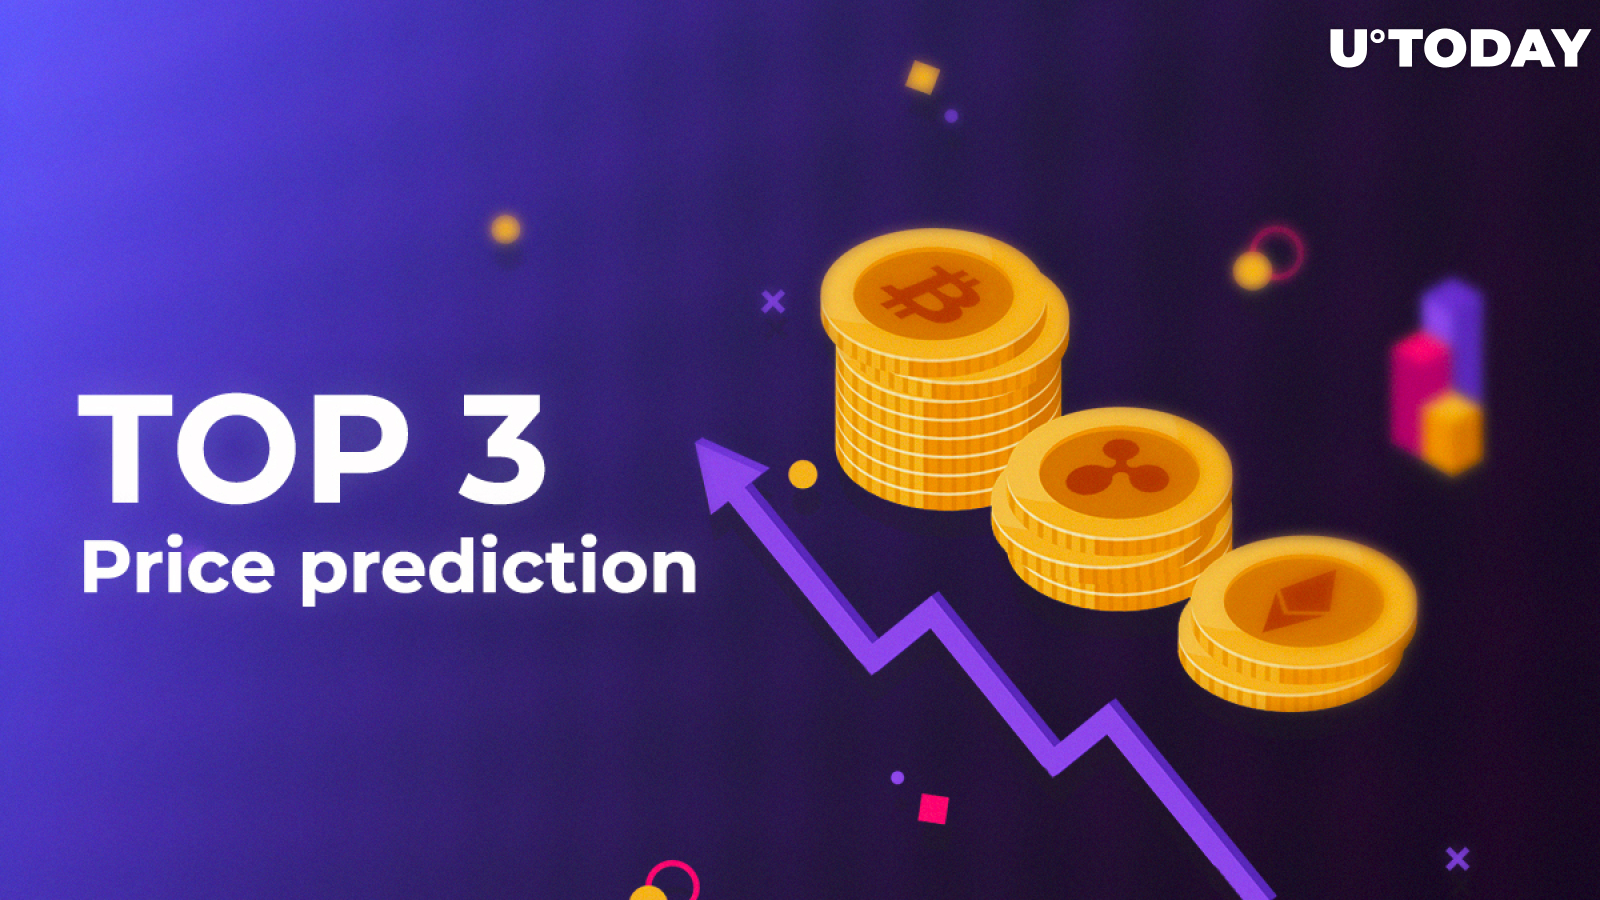 TOP 3 Price Prediction: BTC, Ripple (XRP), ETH: Have Bulls Already Entered the Market or Still Not Yet?